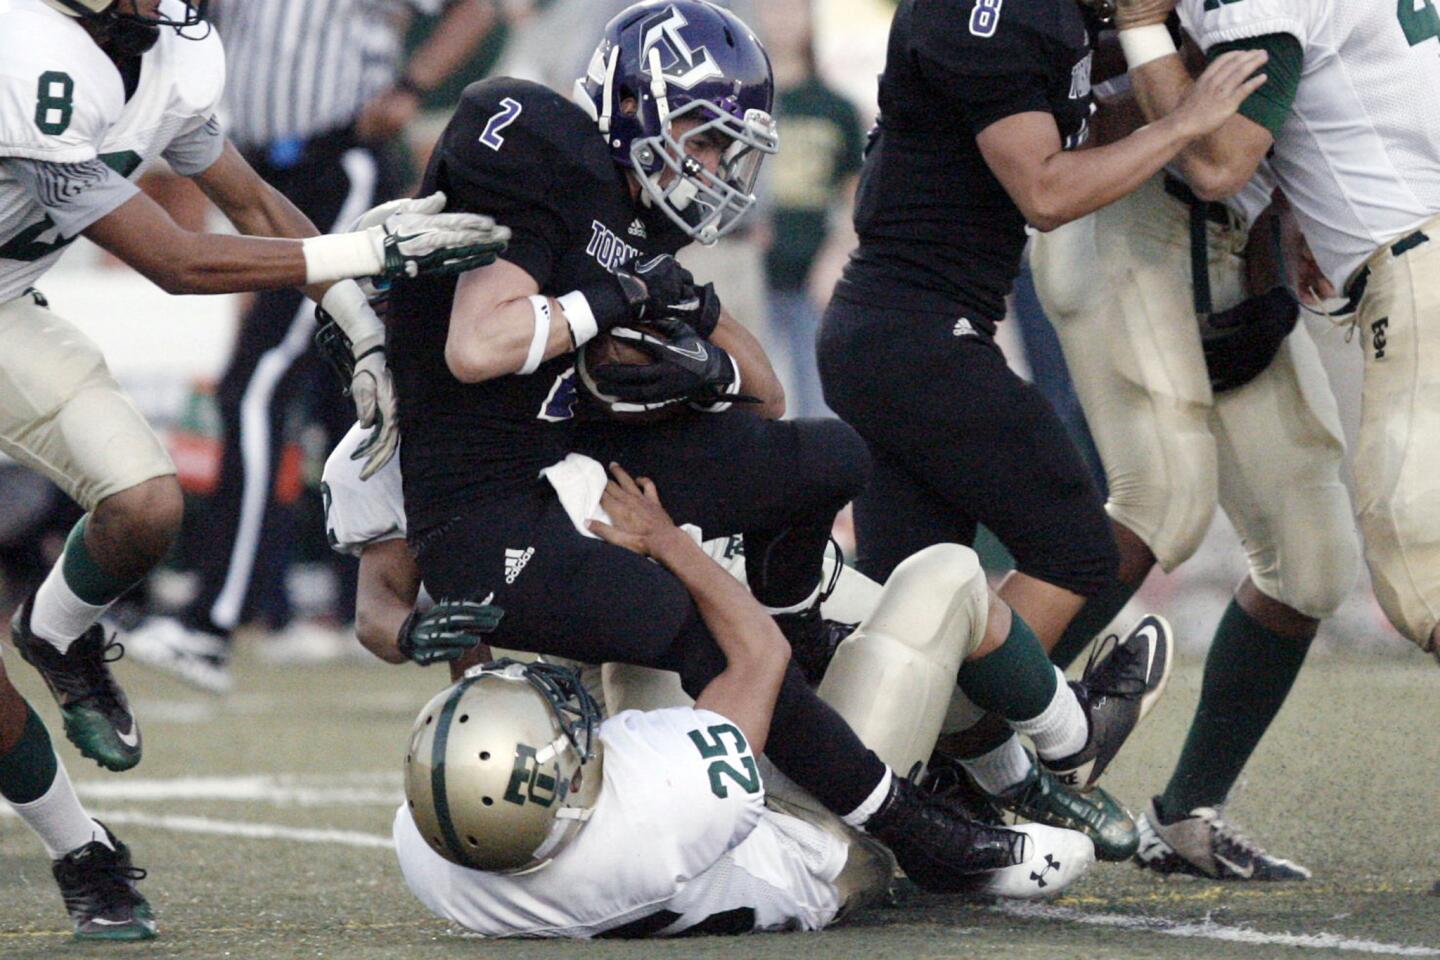 Hoover's Zach Hanson, top, gets tackled by Temple City's Kelvin Li during a game at Glendale High School on Thursday, September 13, 2012.